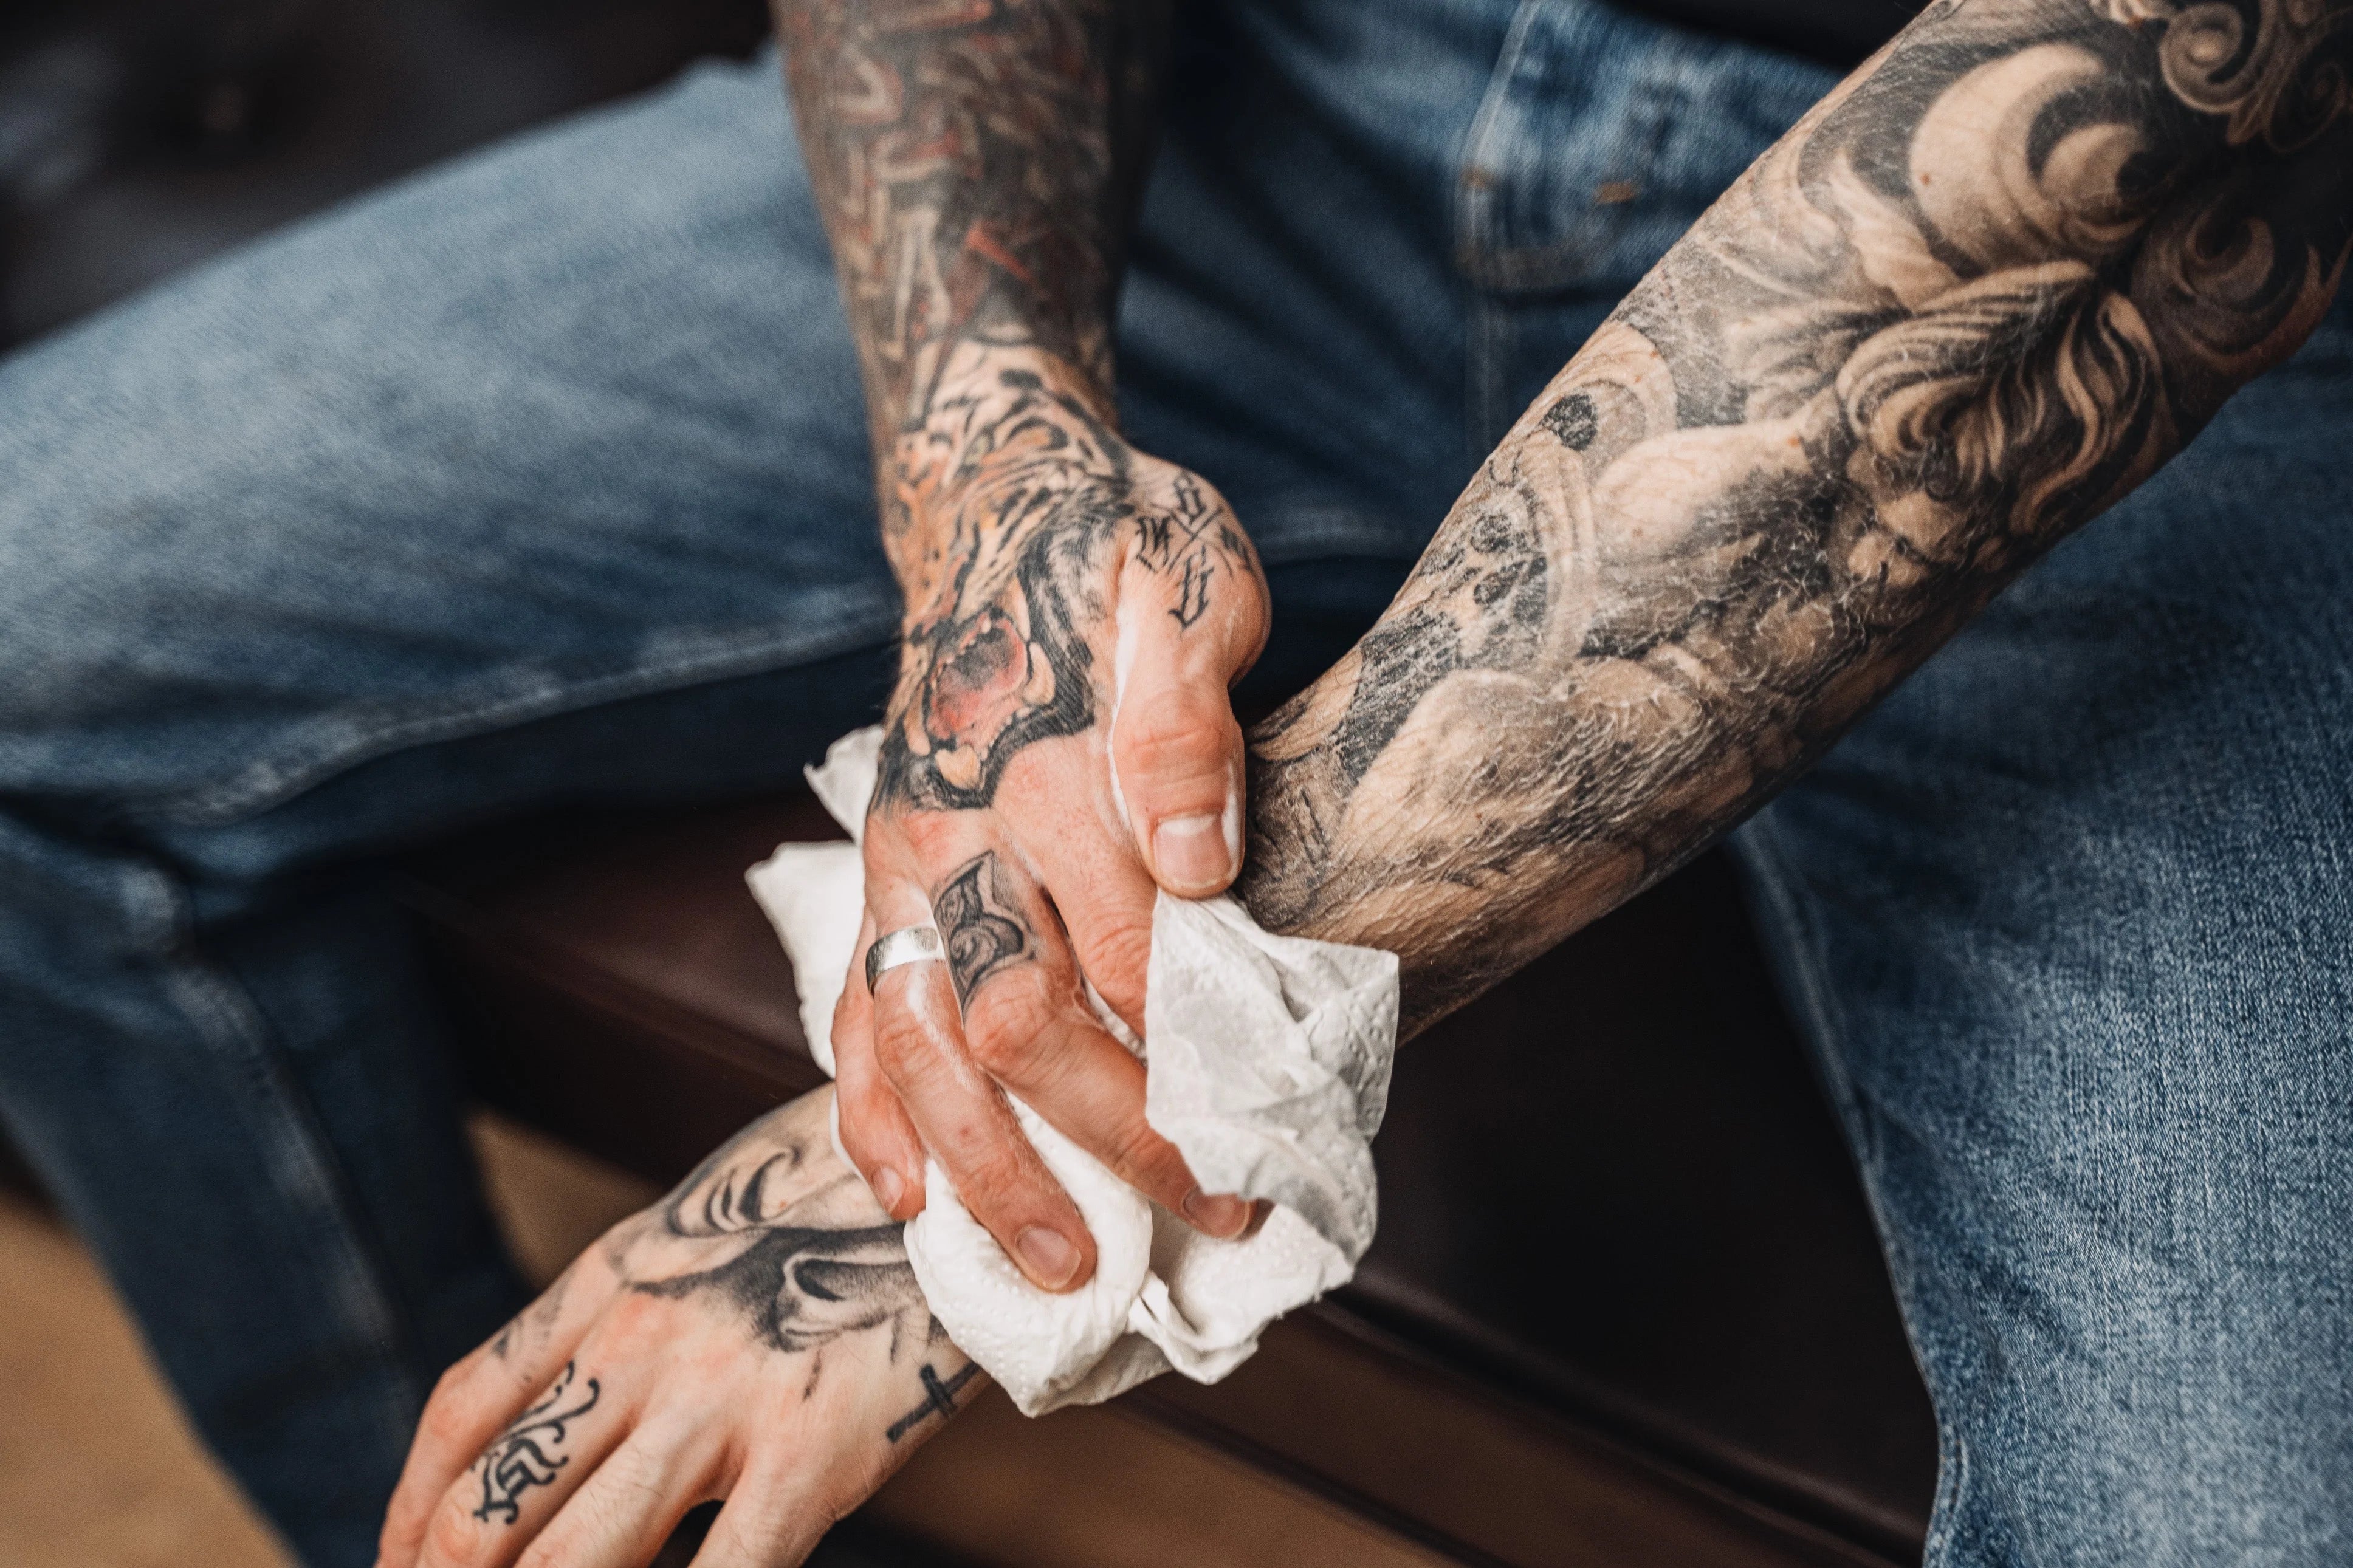 Tattooing - Improving the healing process